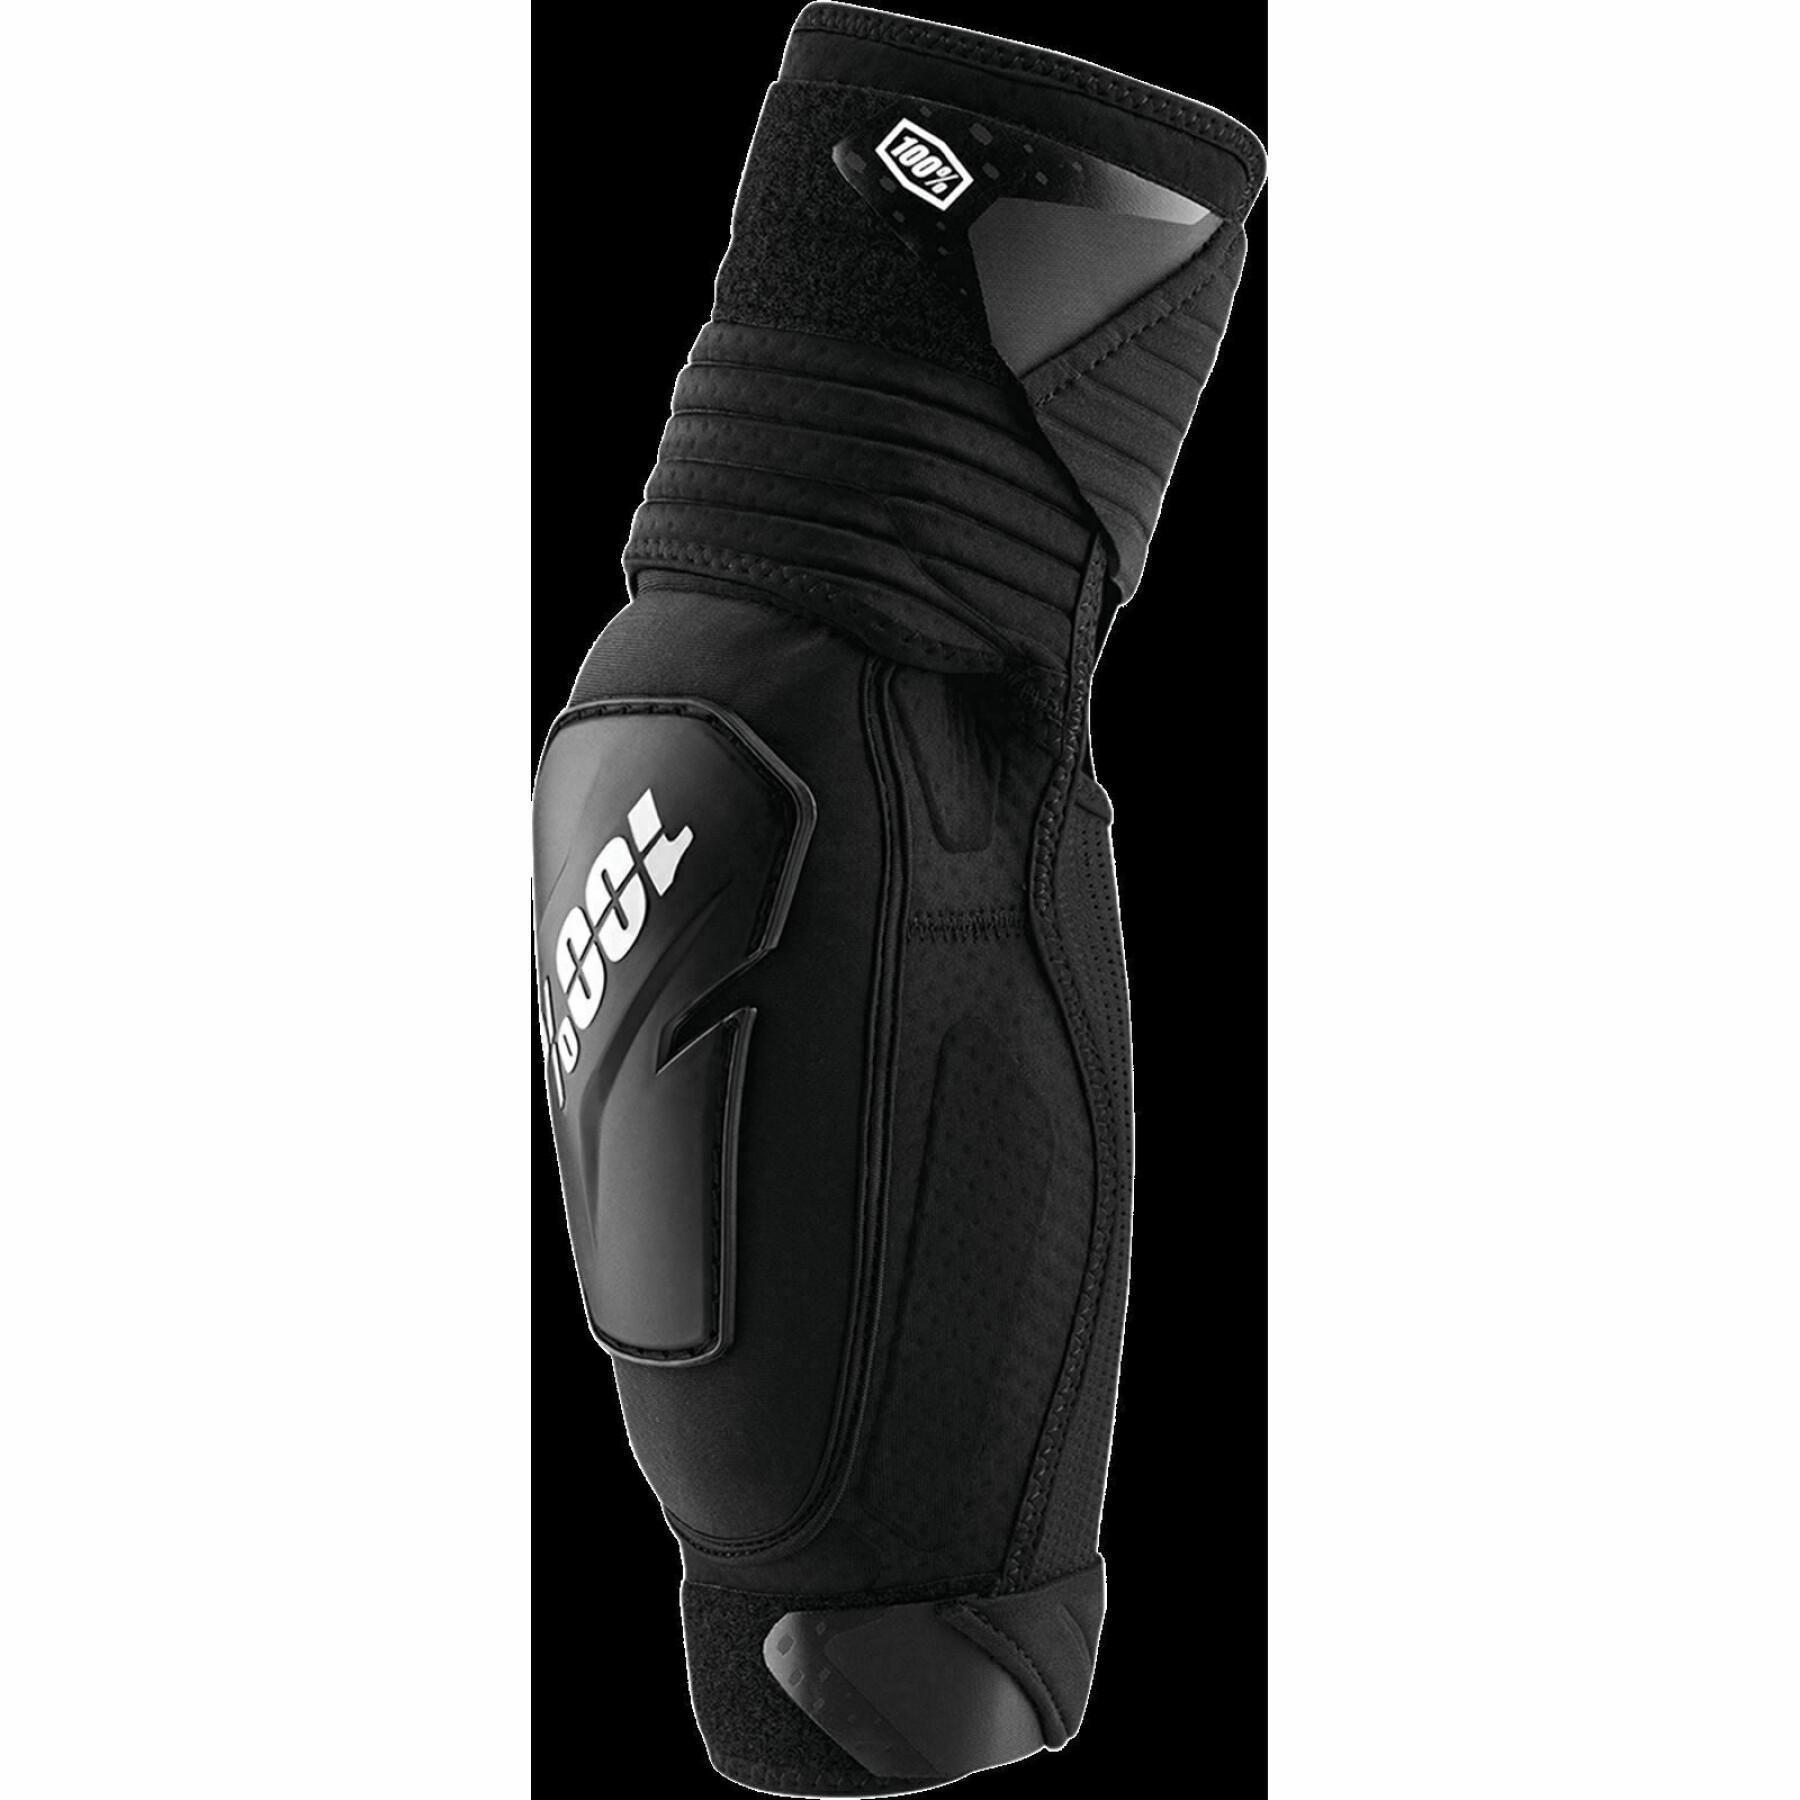 Elbow pads 100% fortis